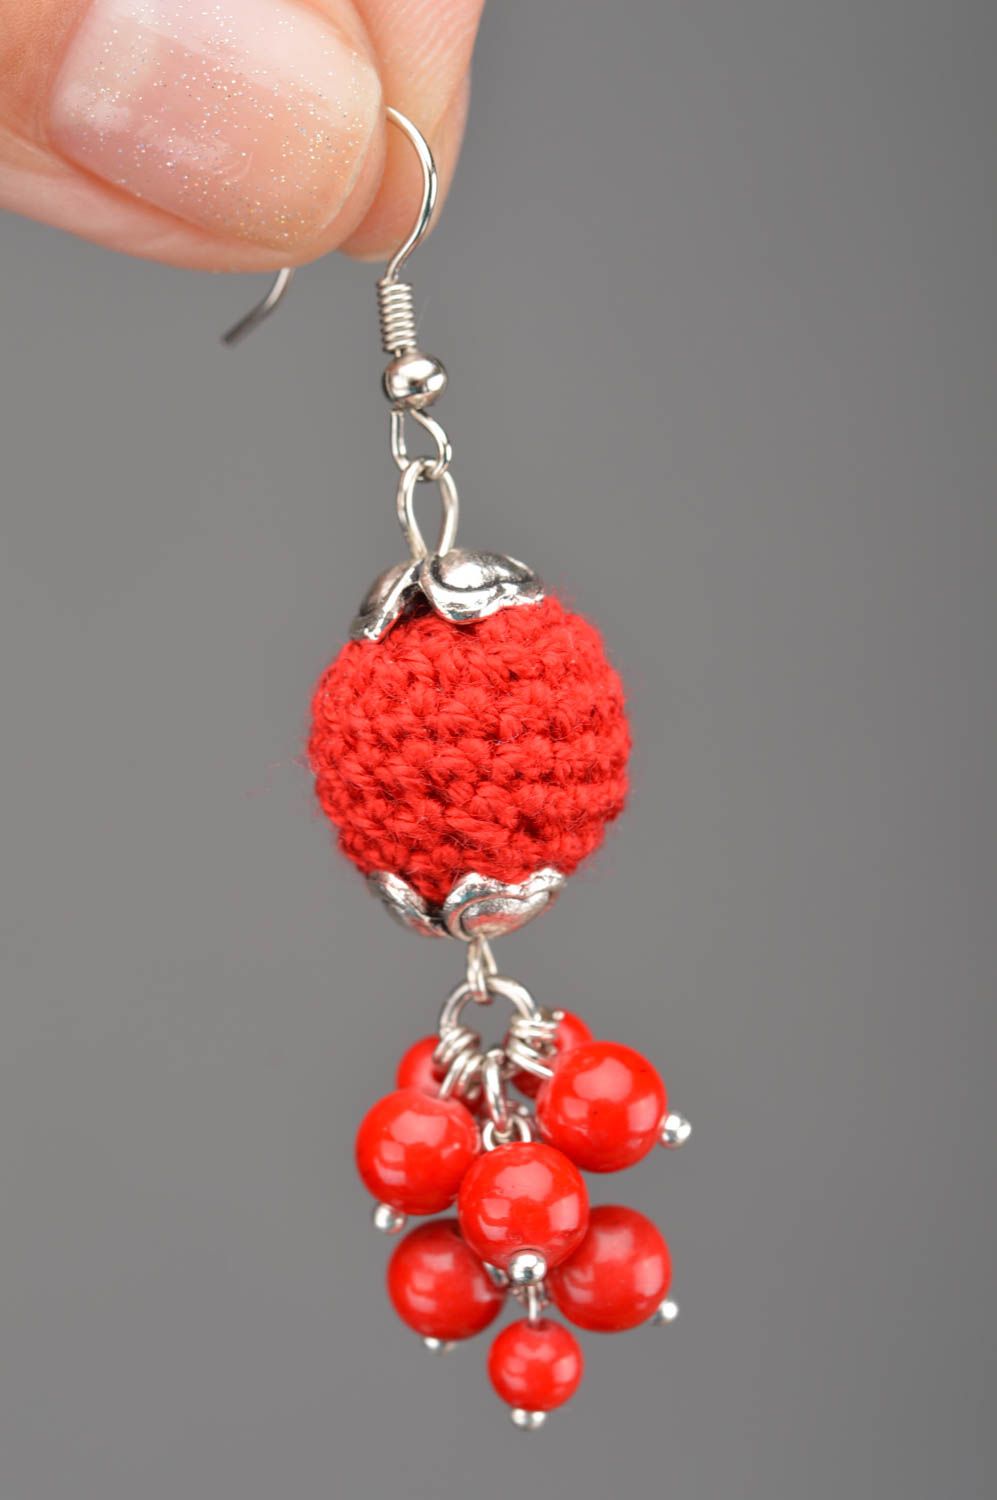 Designer earrings with red crocheted over beads handmade stylish accessory photo 2